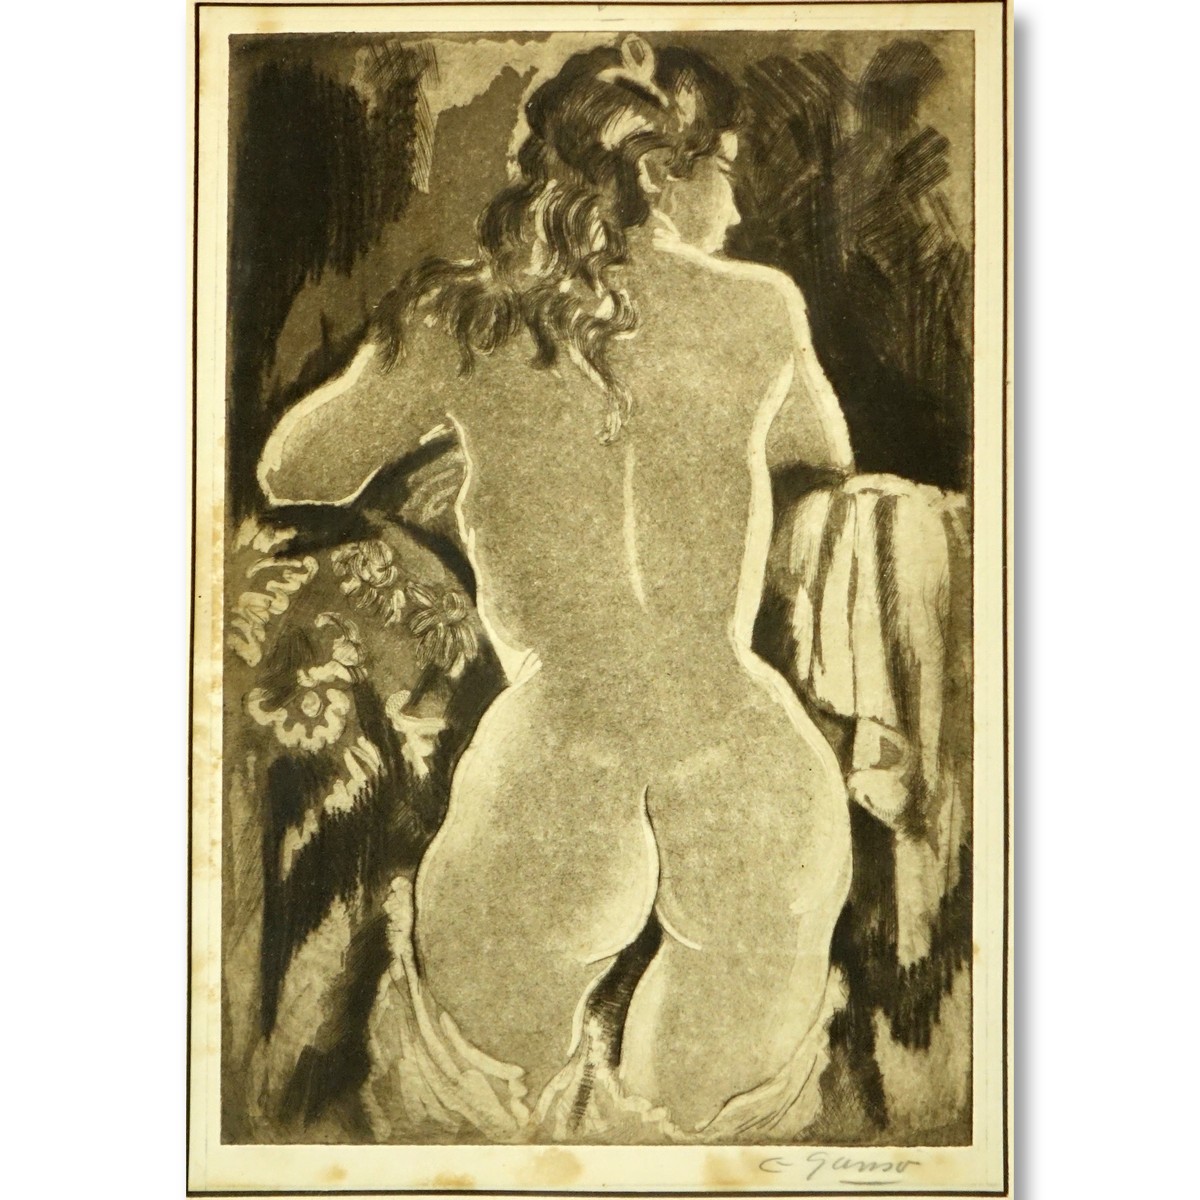 20th Century Etching "Nude". Signed in pencil lower right.